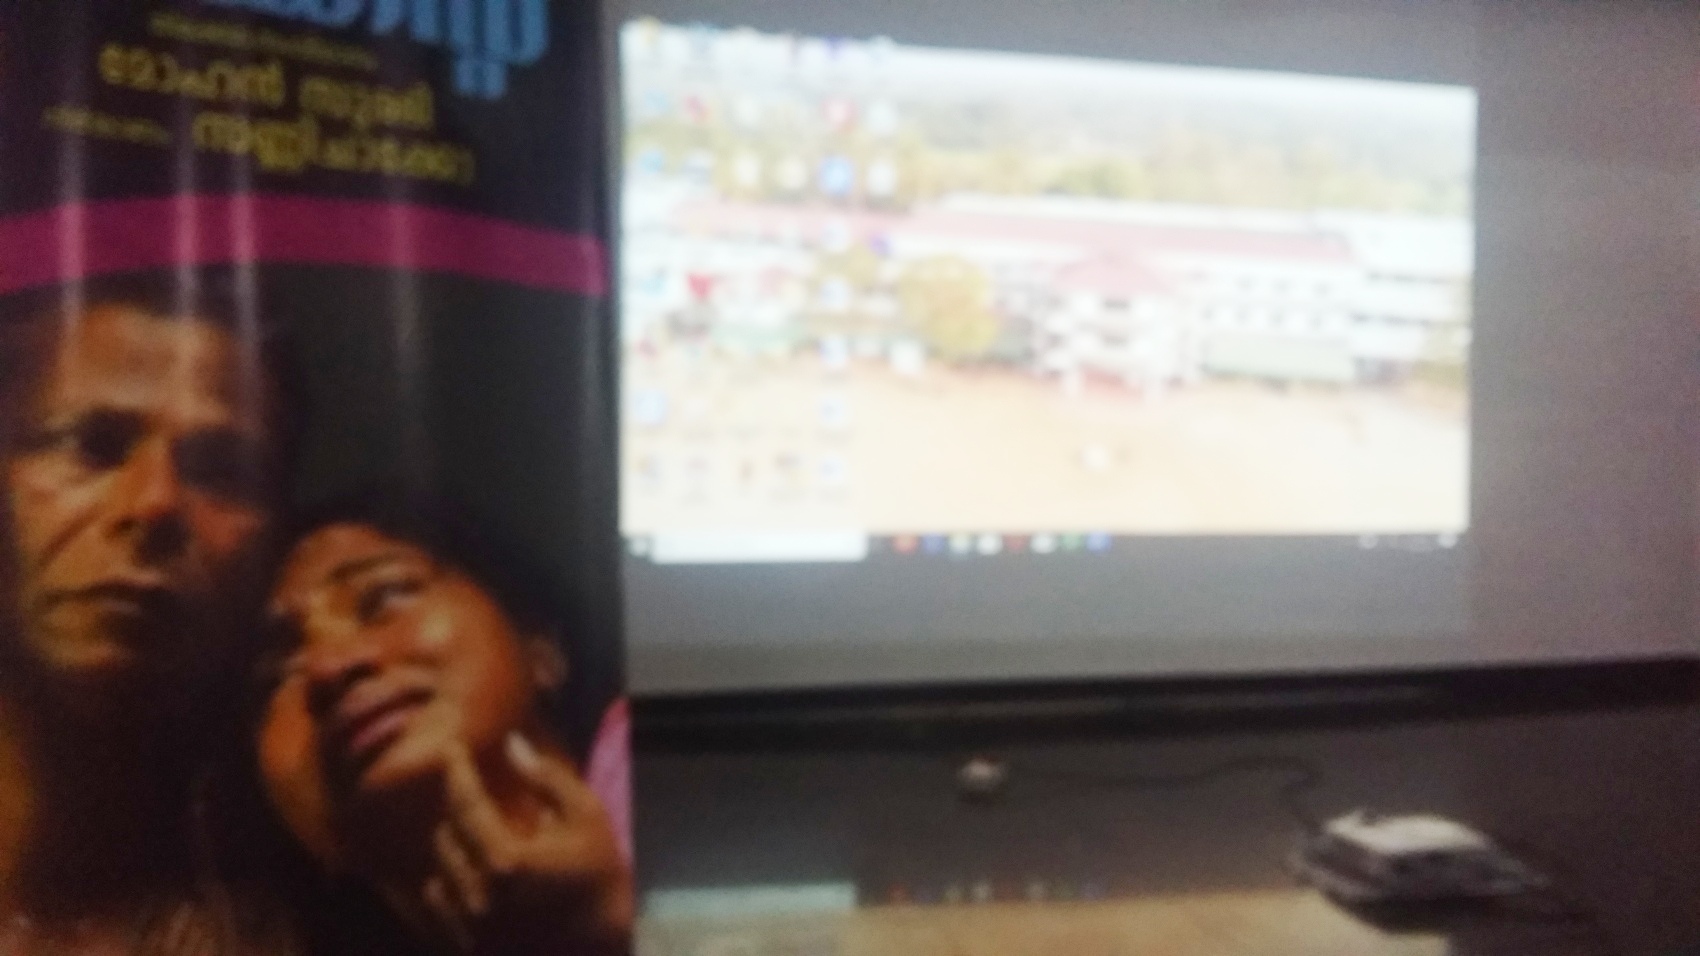 Film Show - Road safety awarness